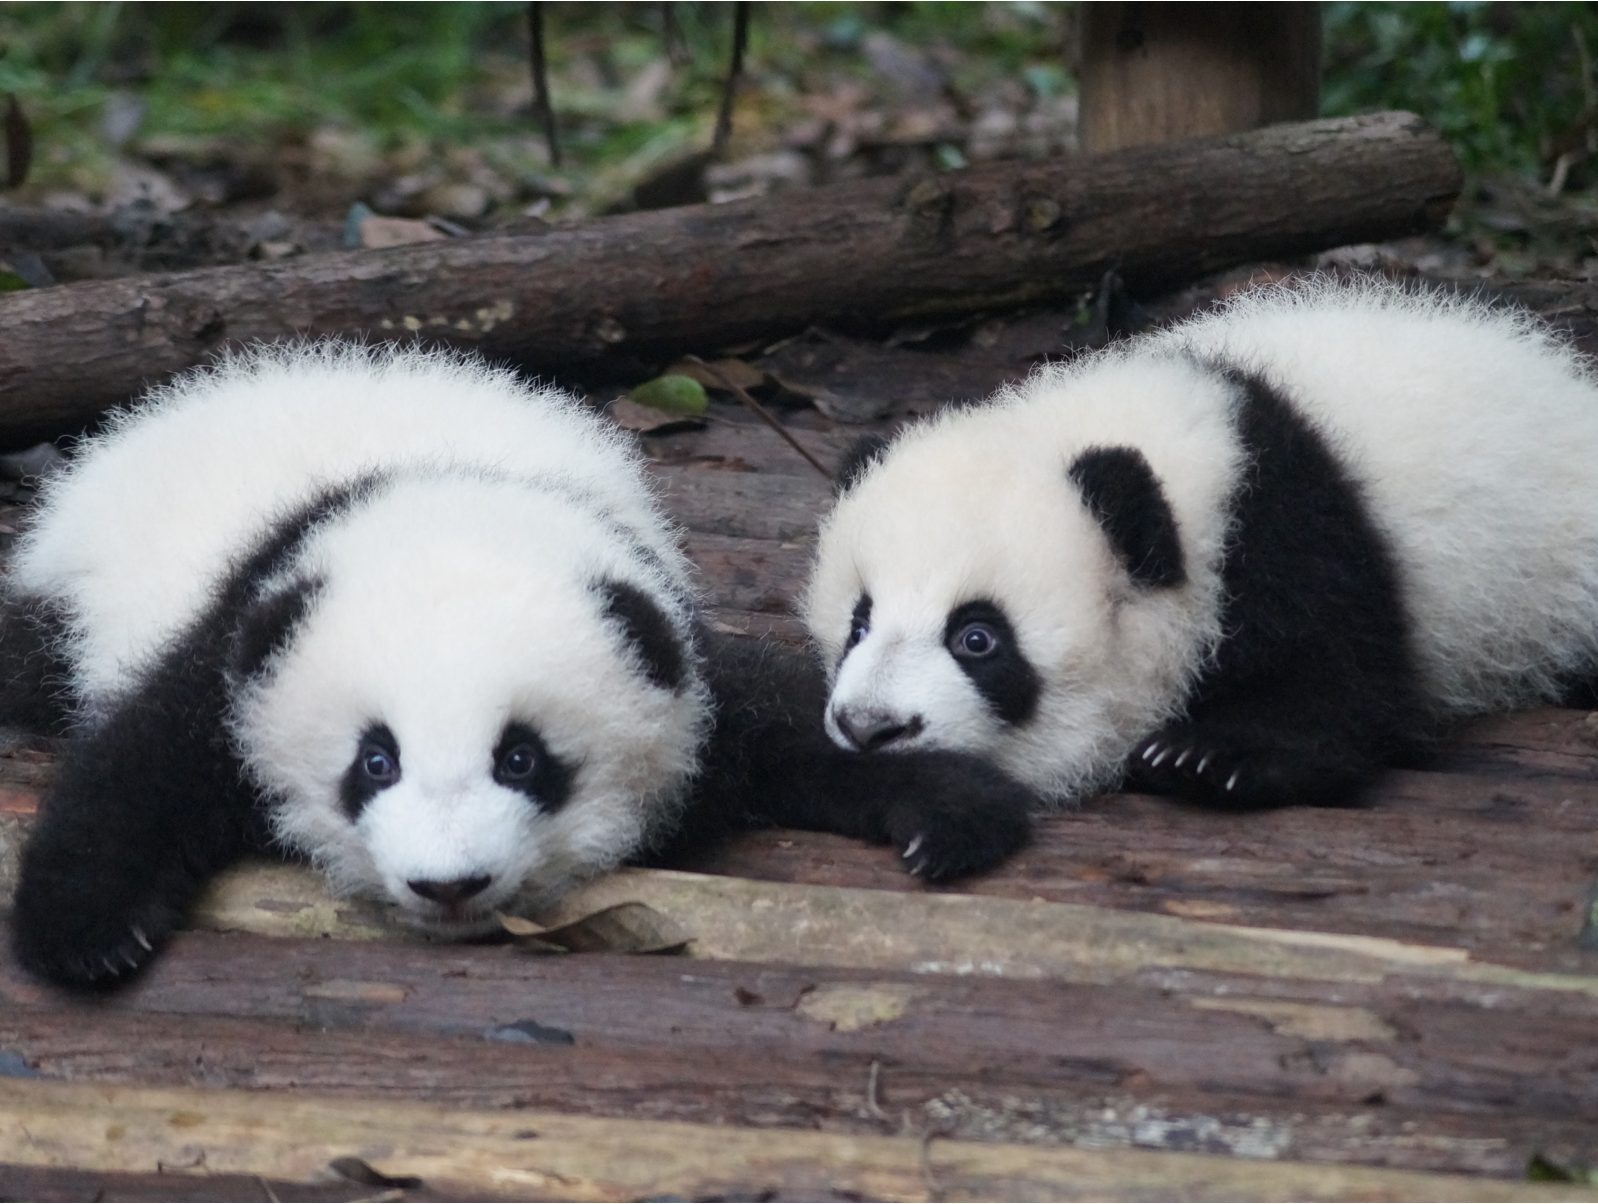 Two panda cubs laying on the dirt floor.